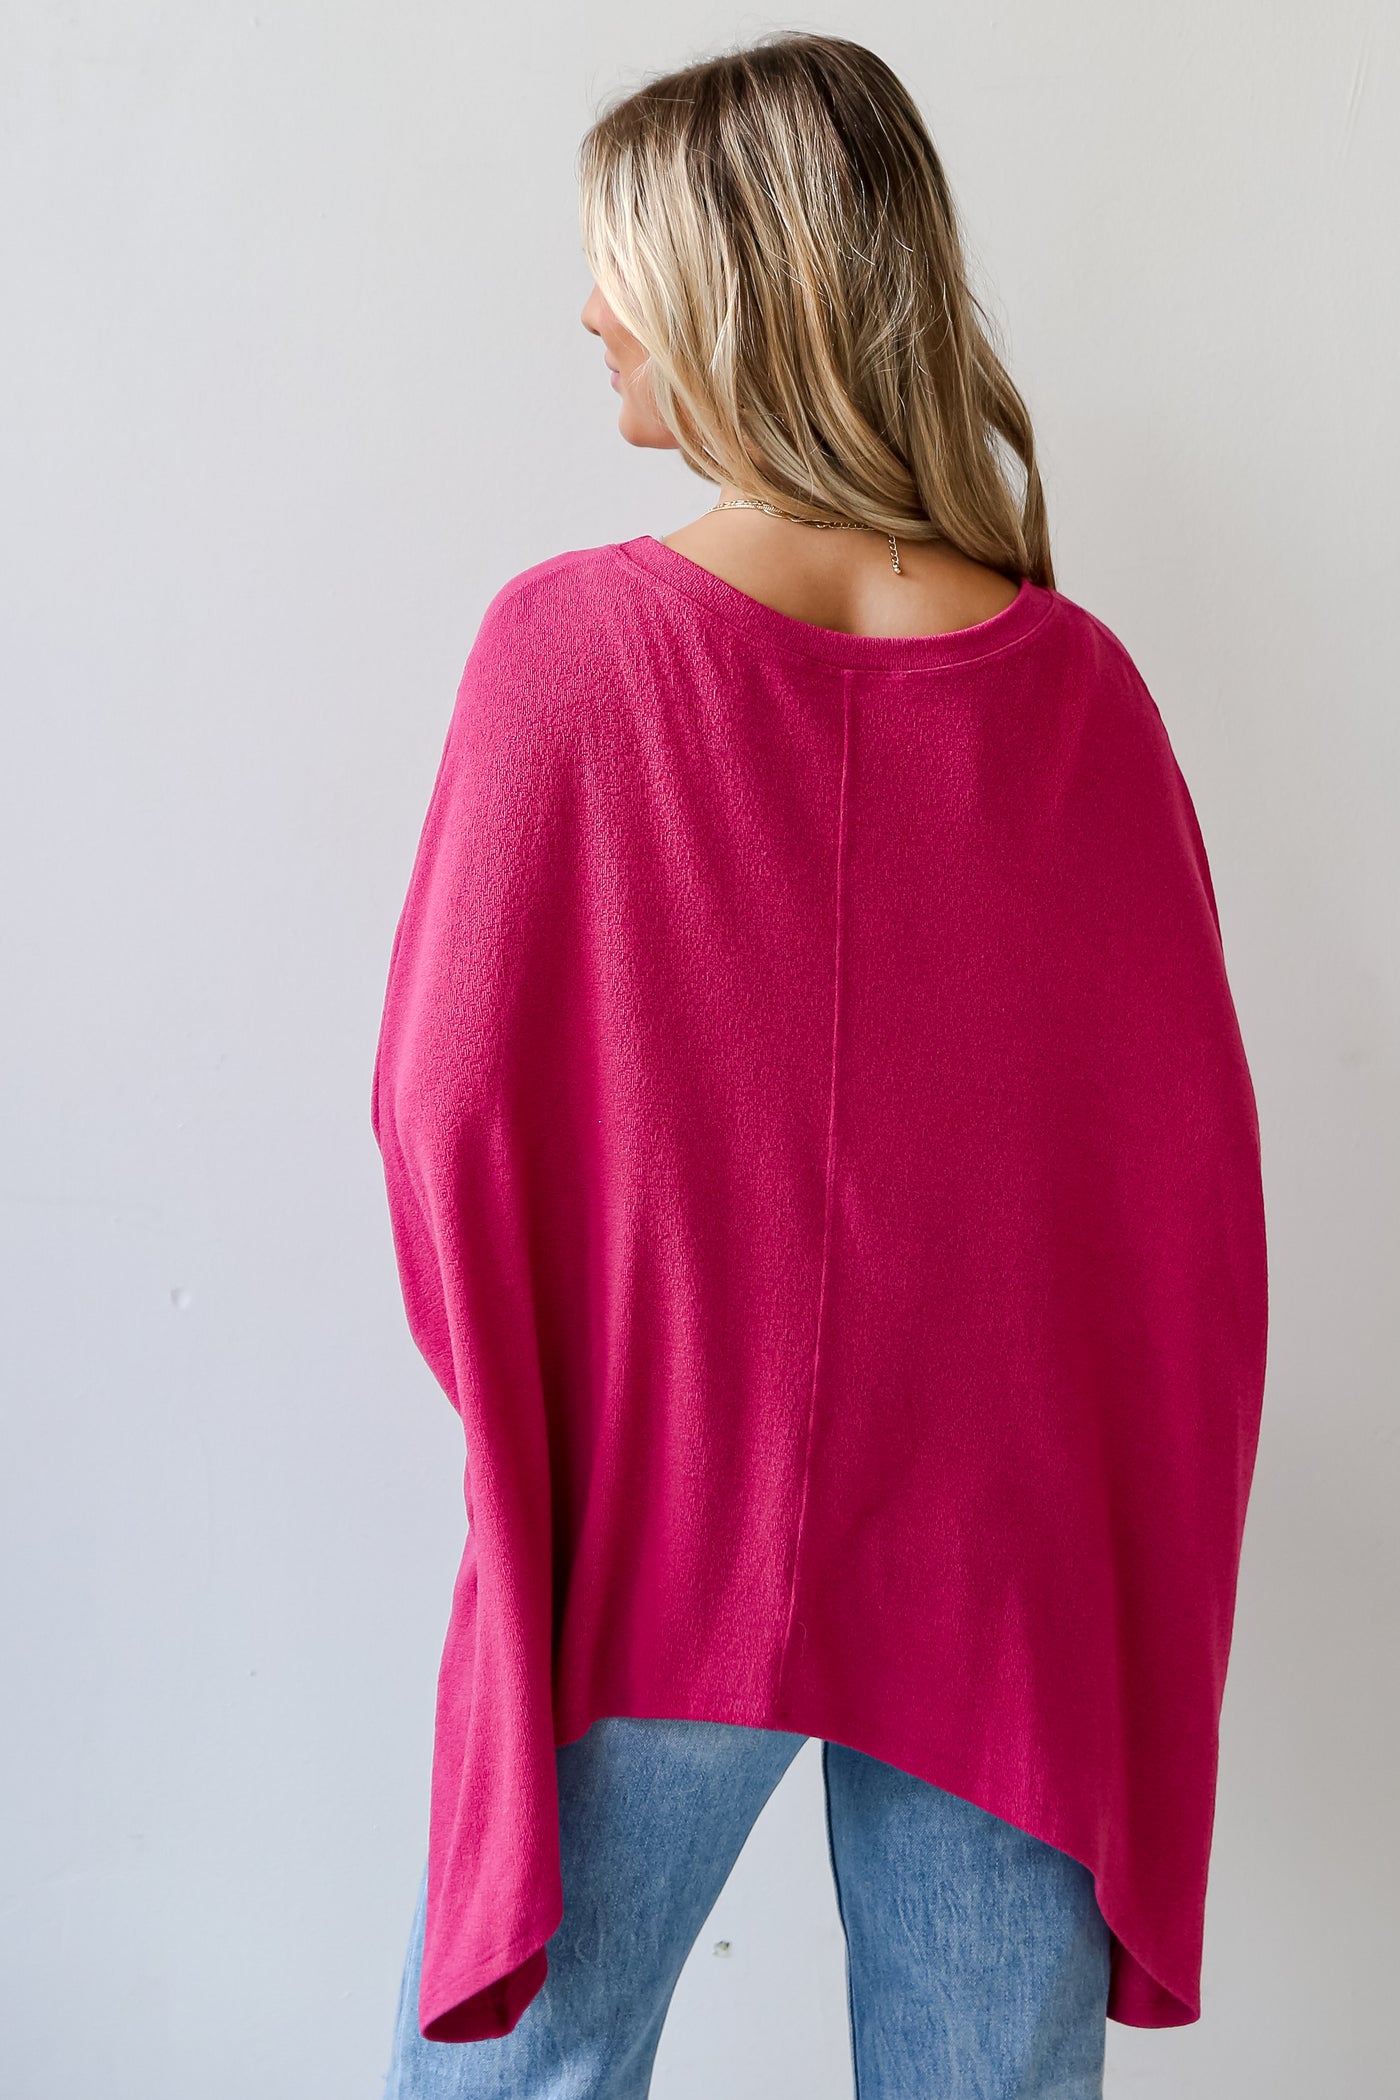 pink Lightweight Knit Oversized Top back view